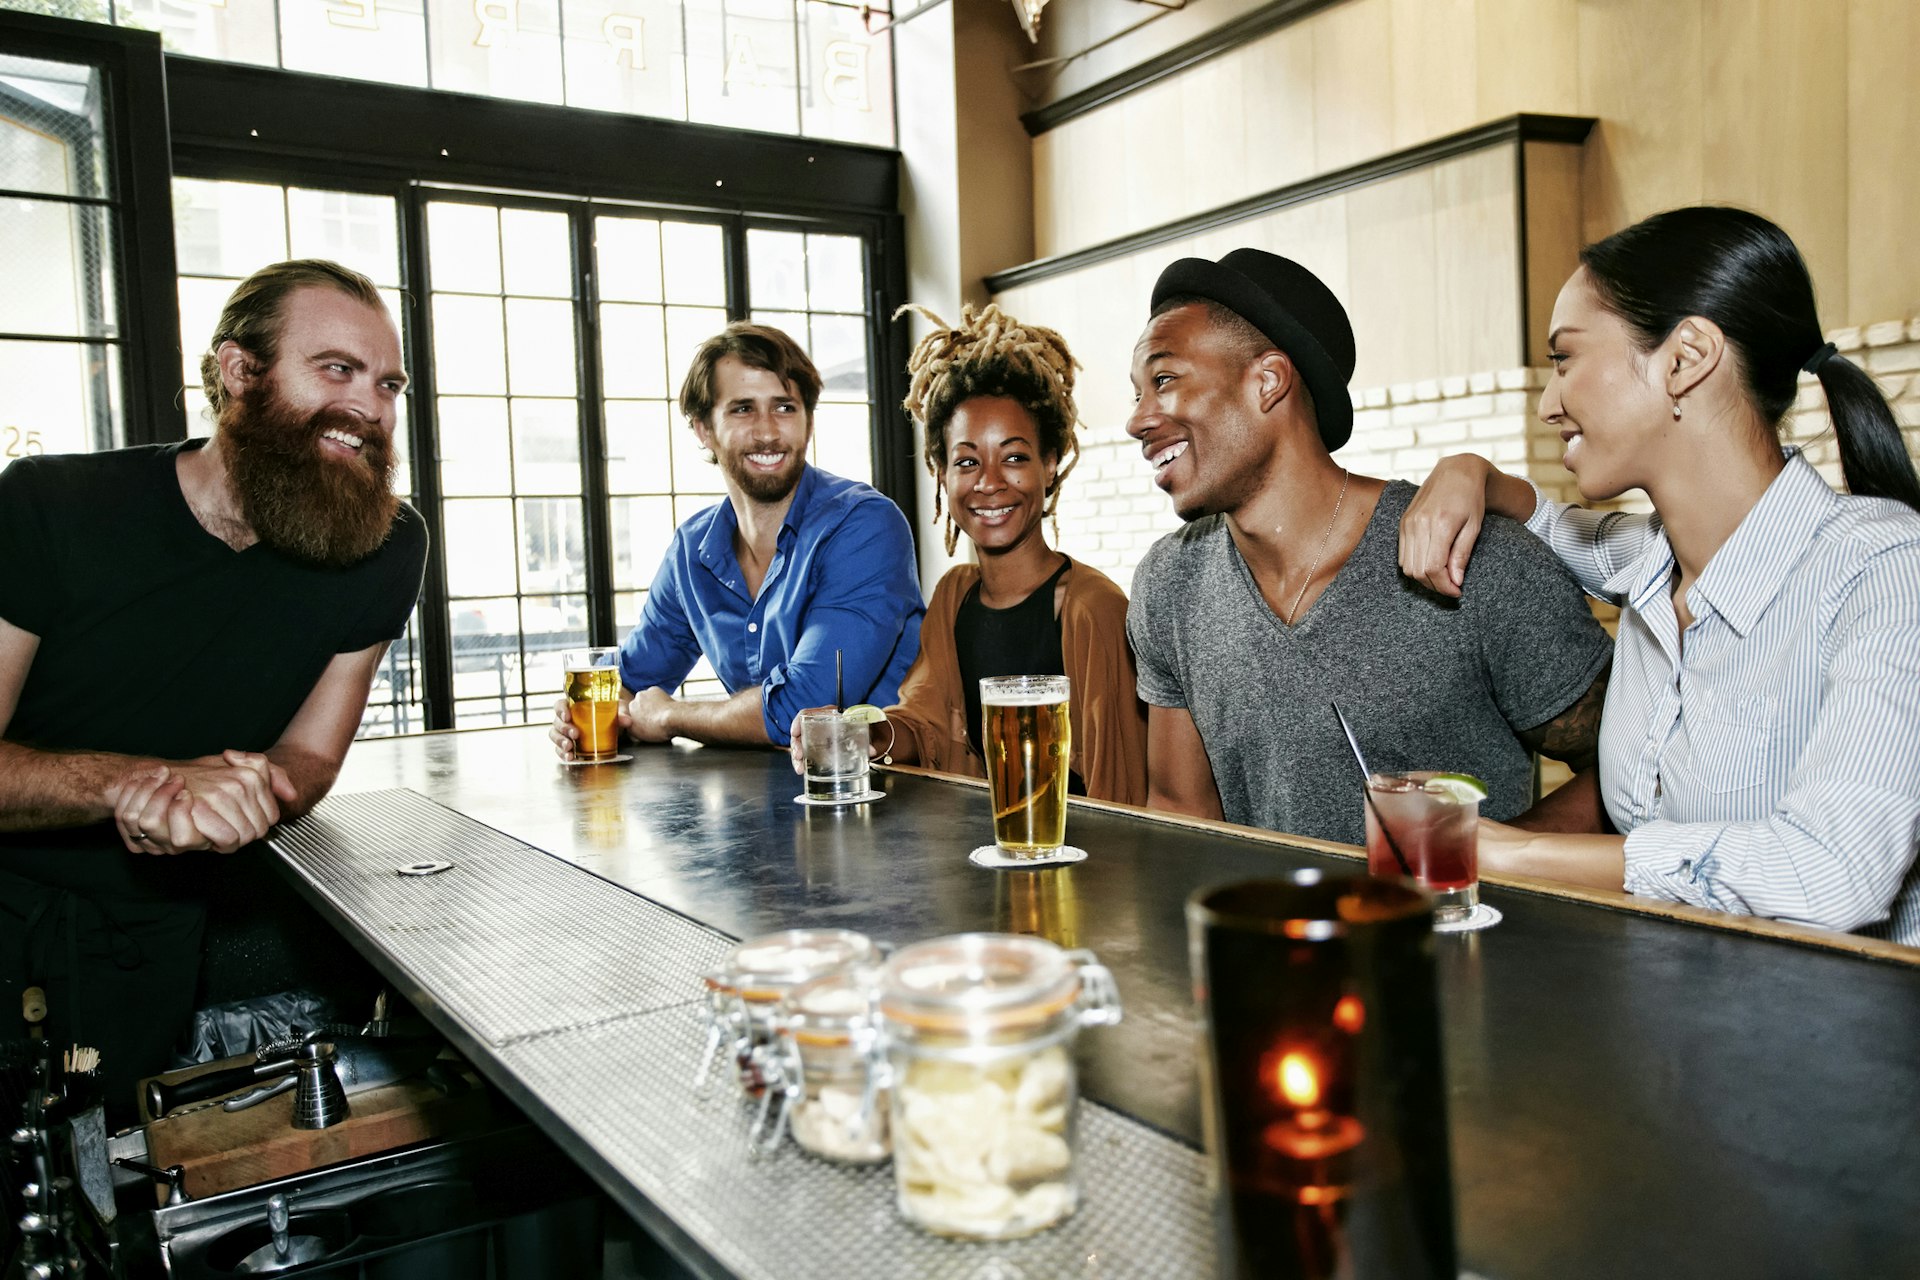 A group of friends smiling and laughing with the bartender